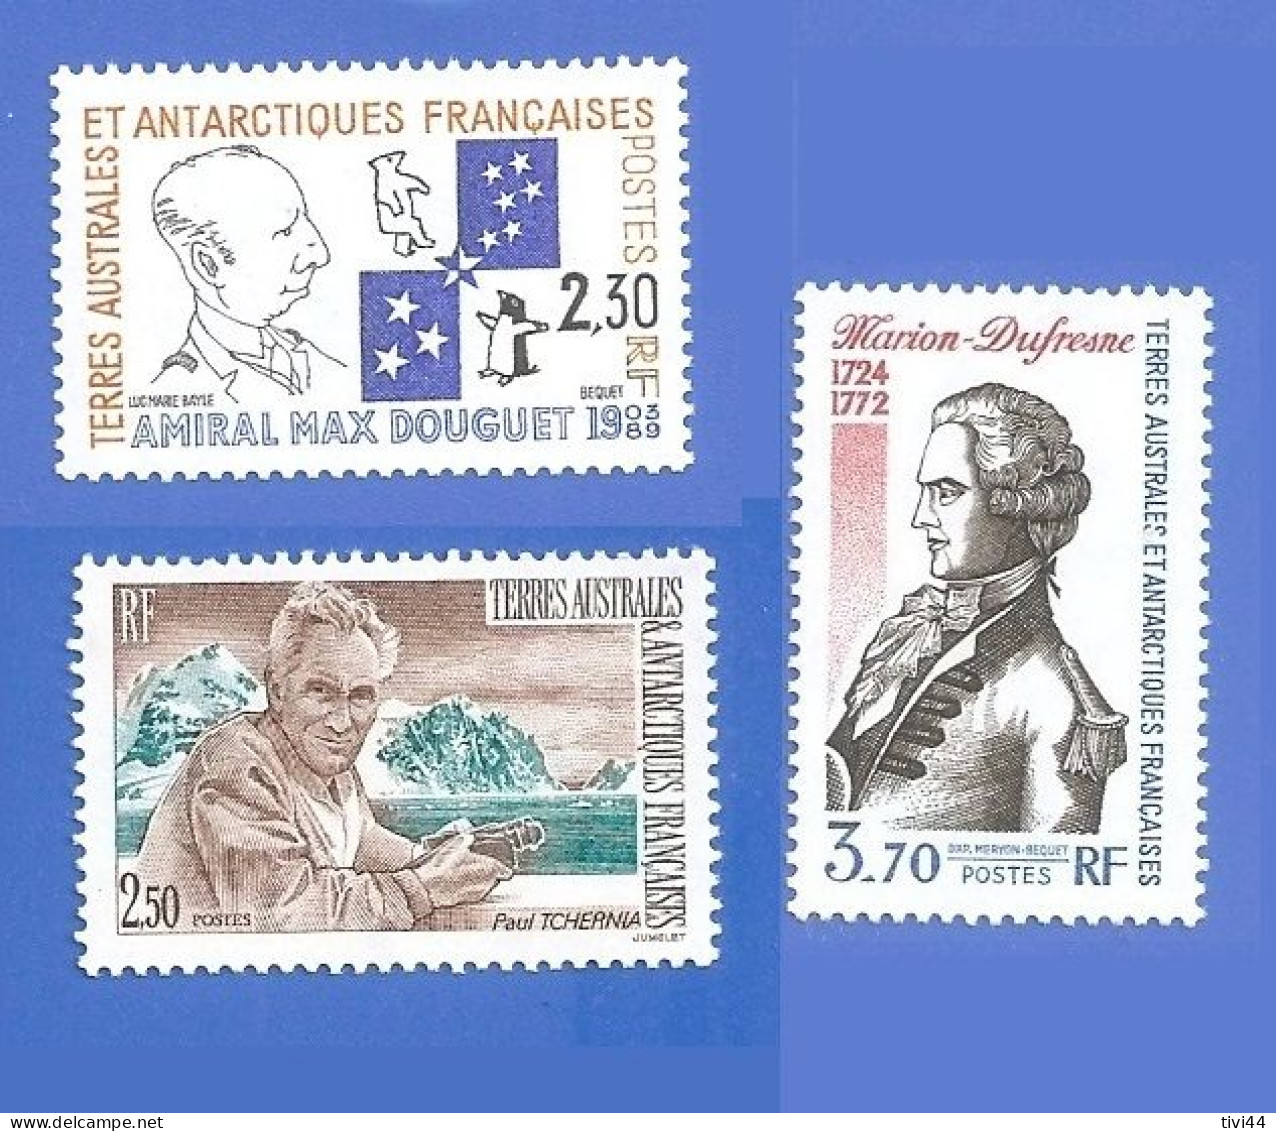 TAAF 157 + 167 + 168 NEUFS ** AMIRAL MAX DOUGUET + PAUL TCHERNIA + MARION DUFRESNE - Unused Stamps